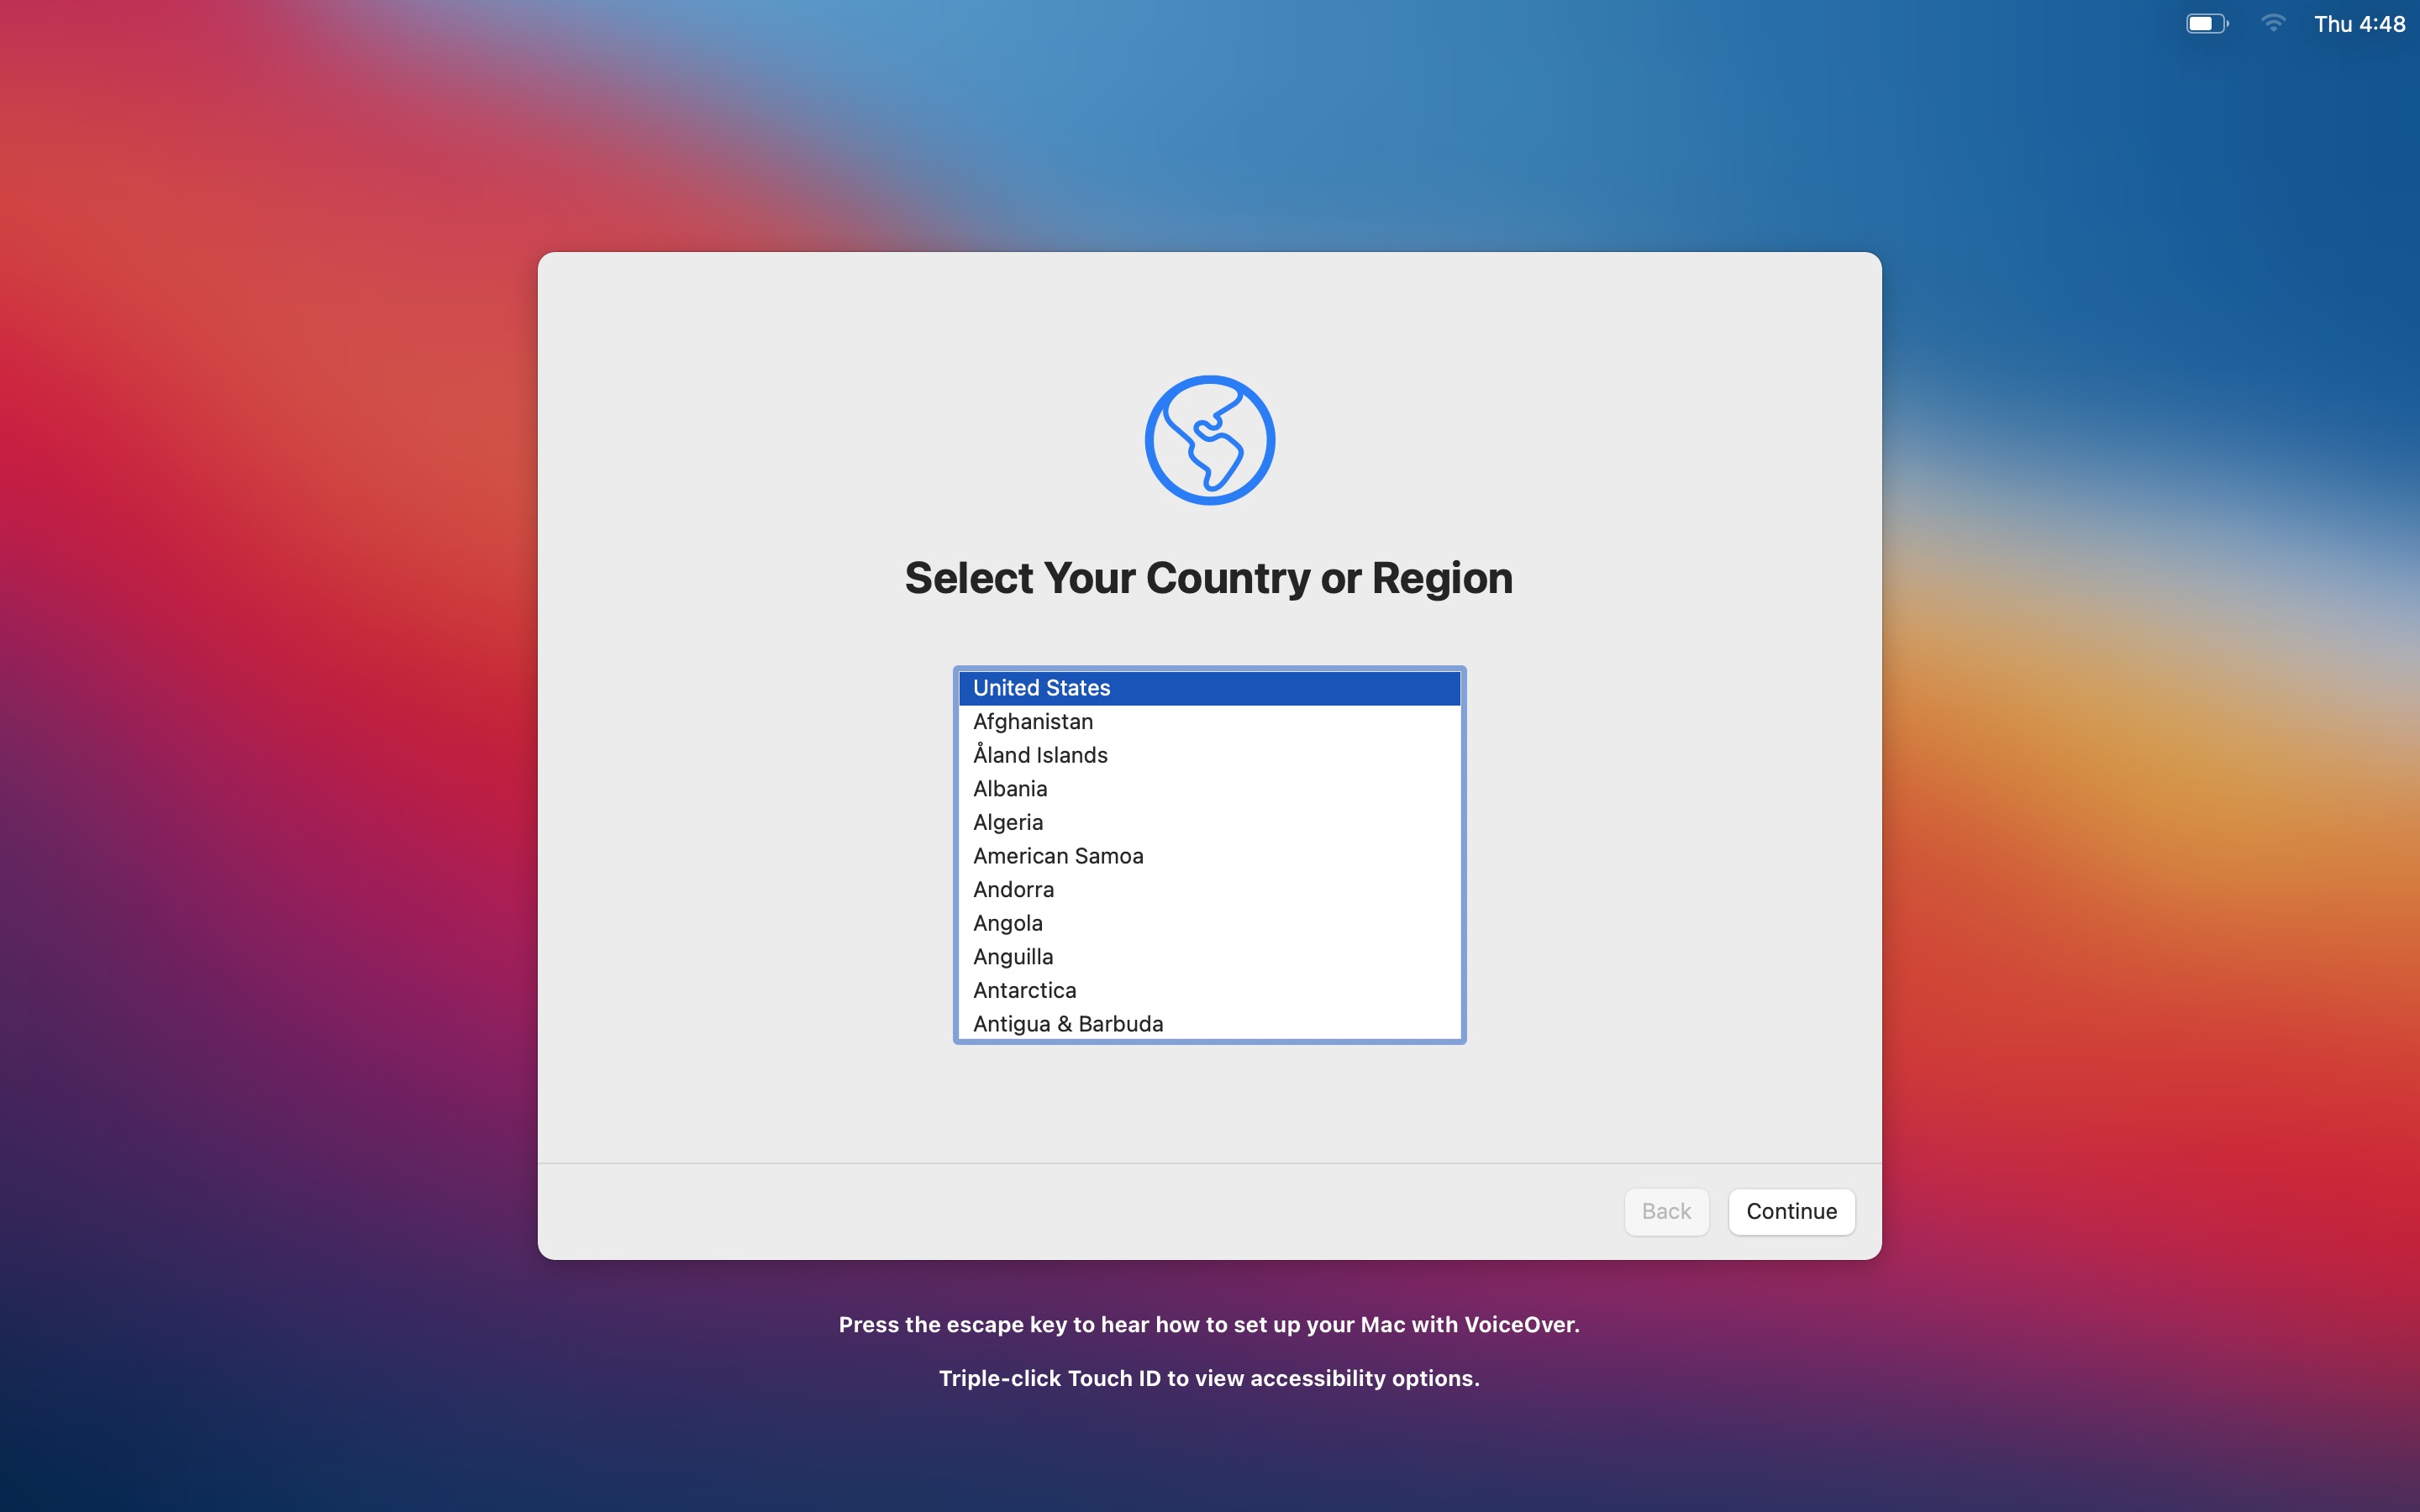 there are two options where mac users can find other versions of access for free.